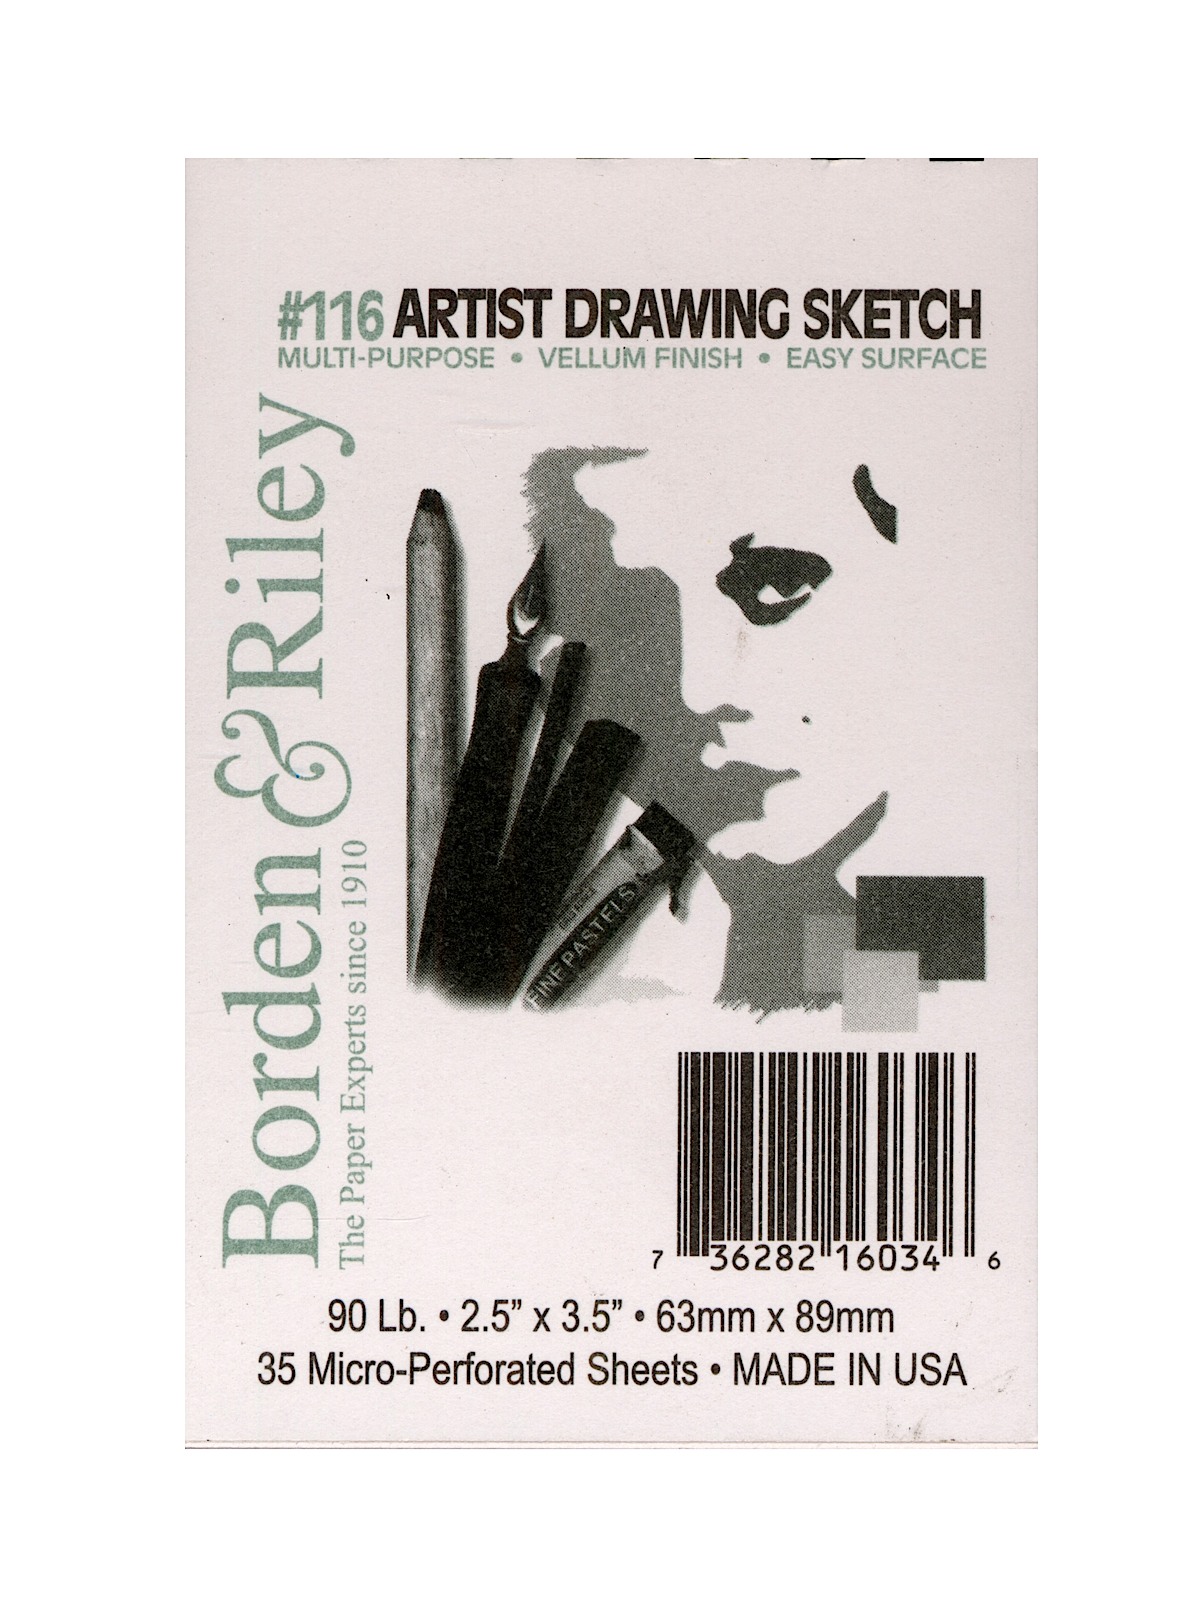 #116 Artist Drawing Sketch Vellum Pads 2 1 2 In. X 3 1 2 In. 35 Sheets Spiral Bound